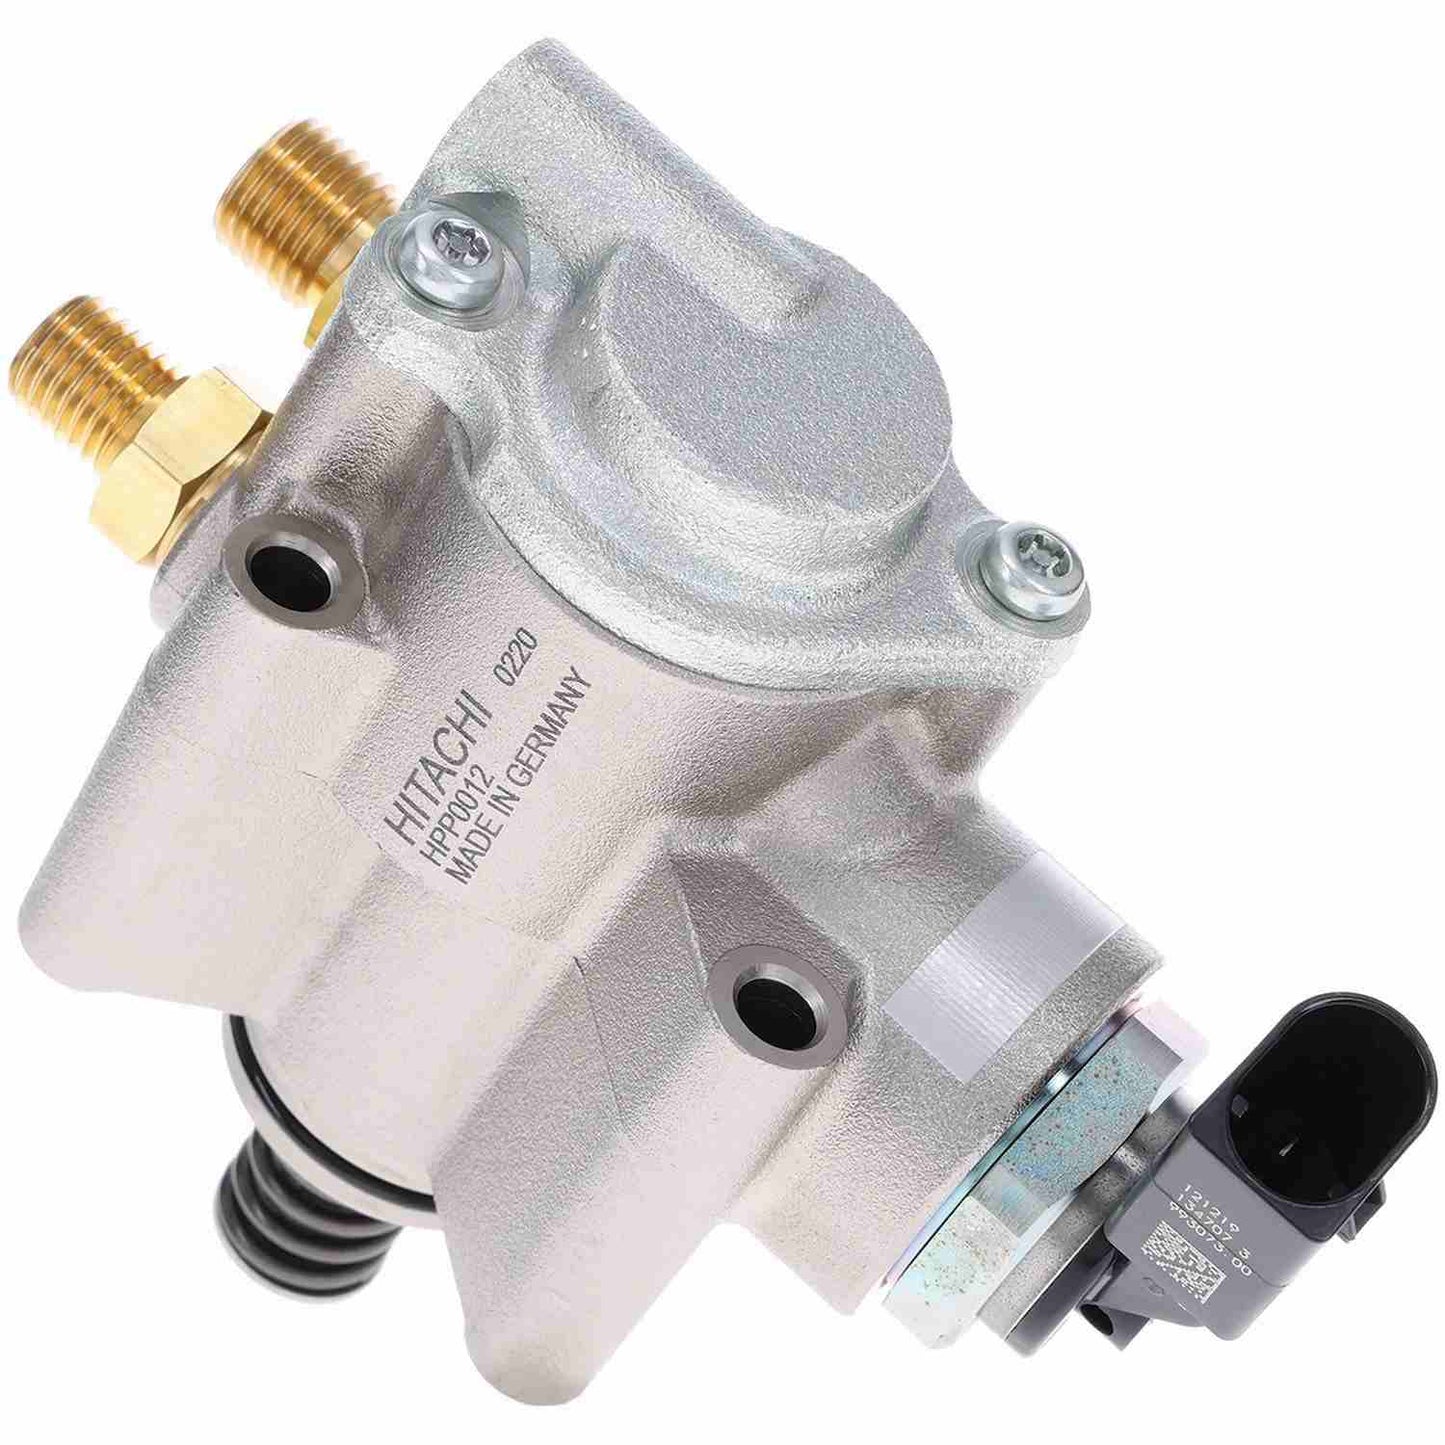 Connector View of Direct Injection High Pressure Fuel Pump HITACHI HPP0012